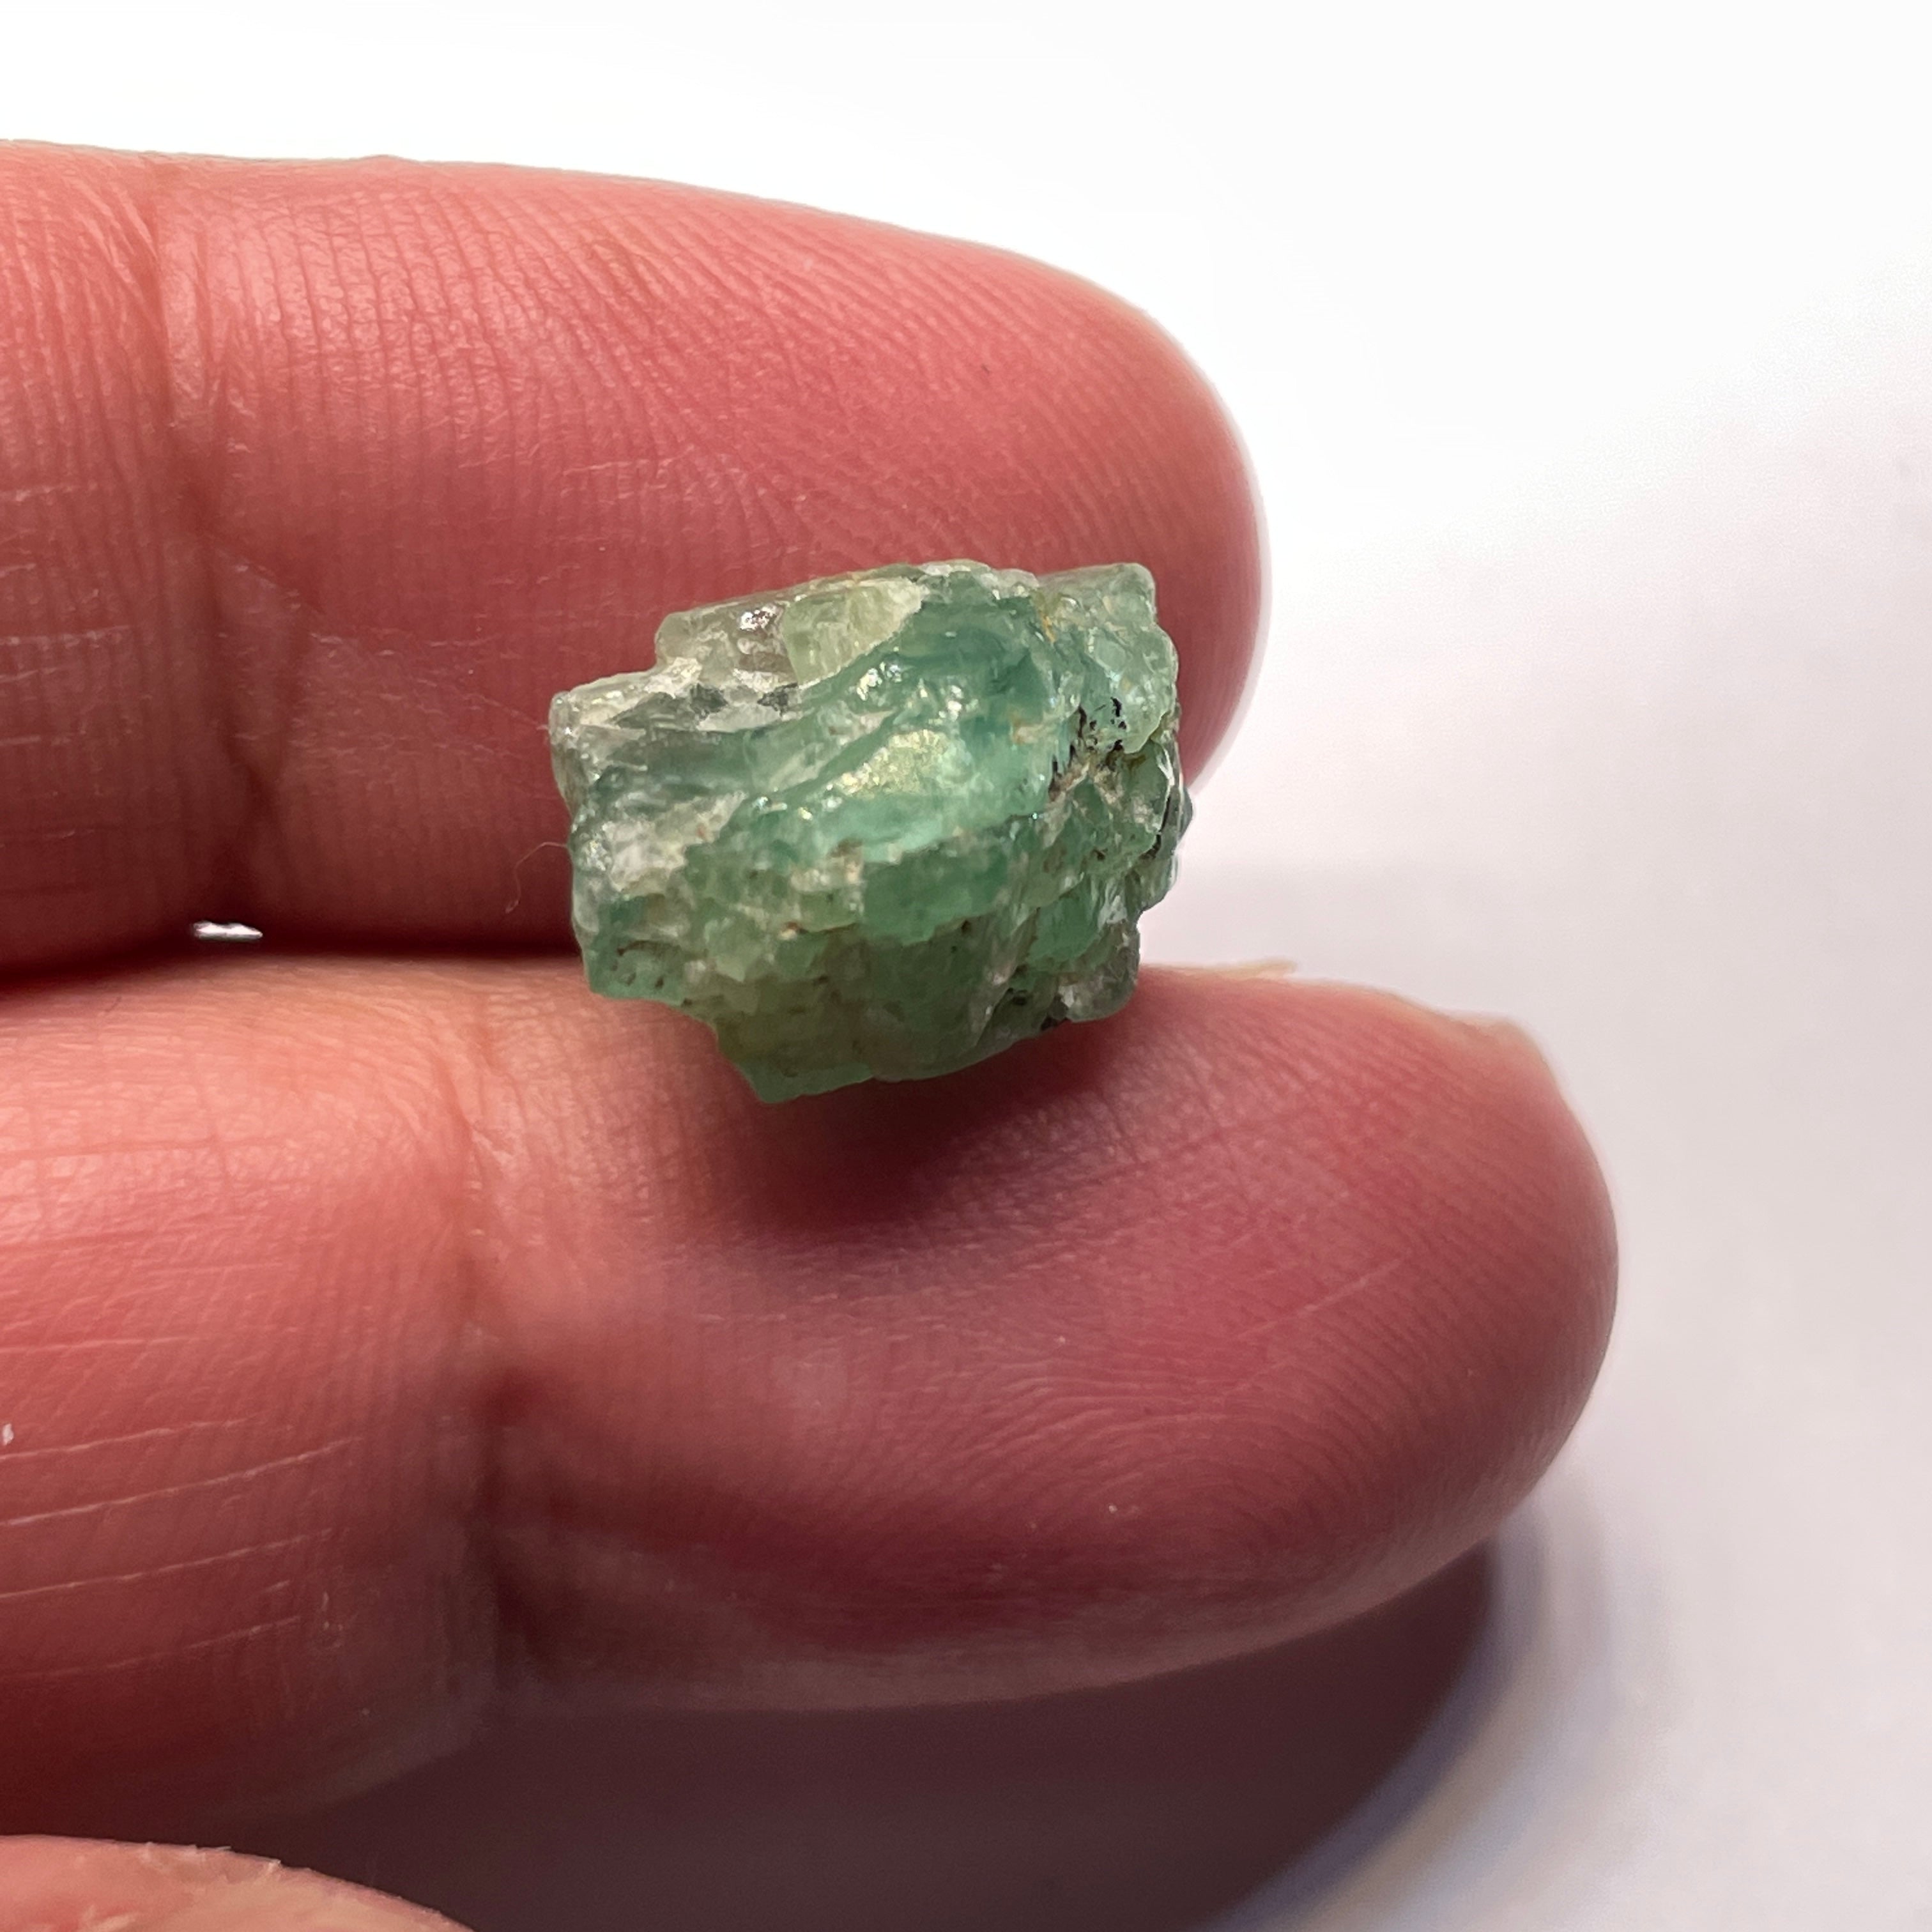 9.39Ct Emerald Crystal Tanzania Untreated Unheated No Oil With A Gem Portion For Faceting